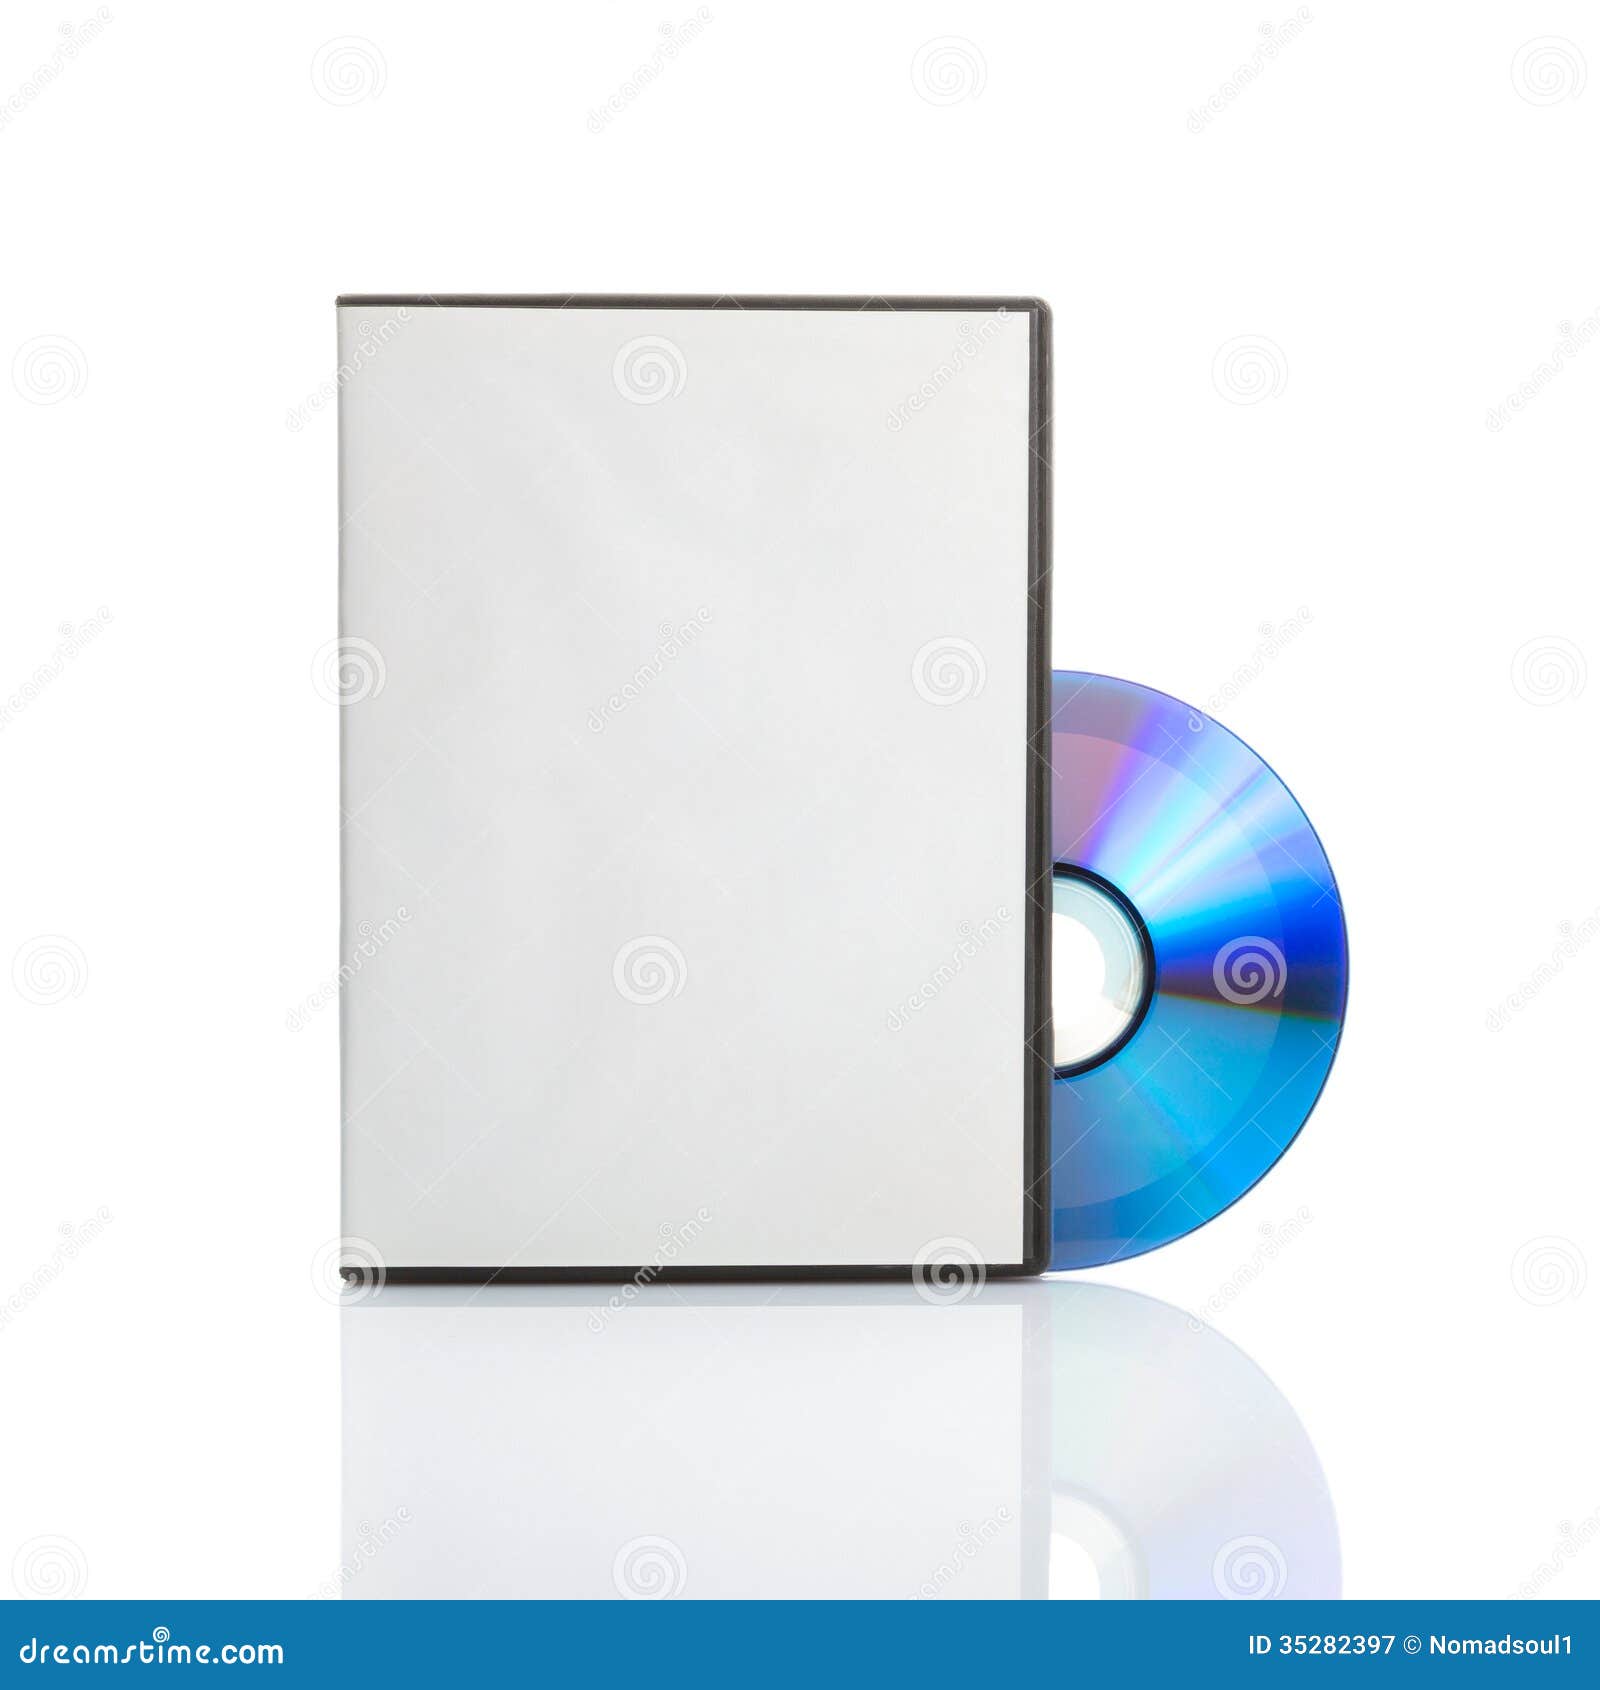 1 826 Dvd Cover Photos Free Royalty Free Stock Photos From Dreamstime